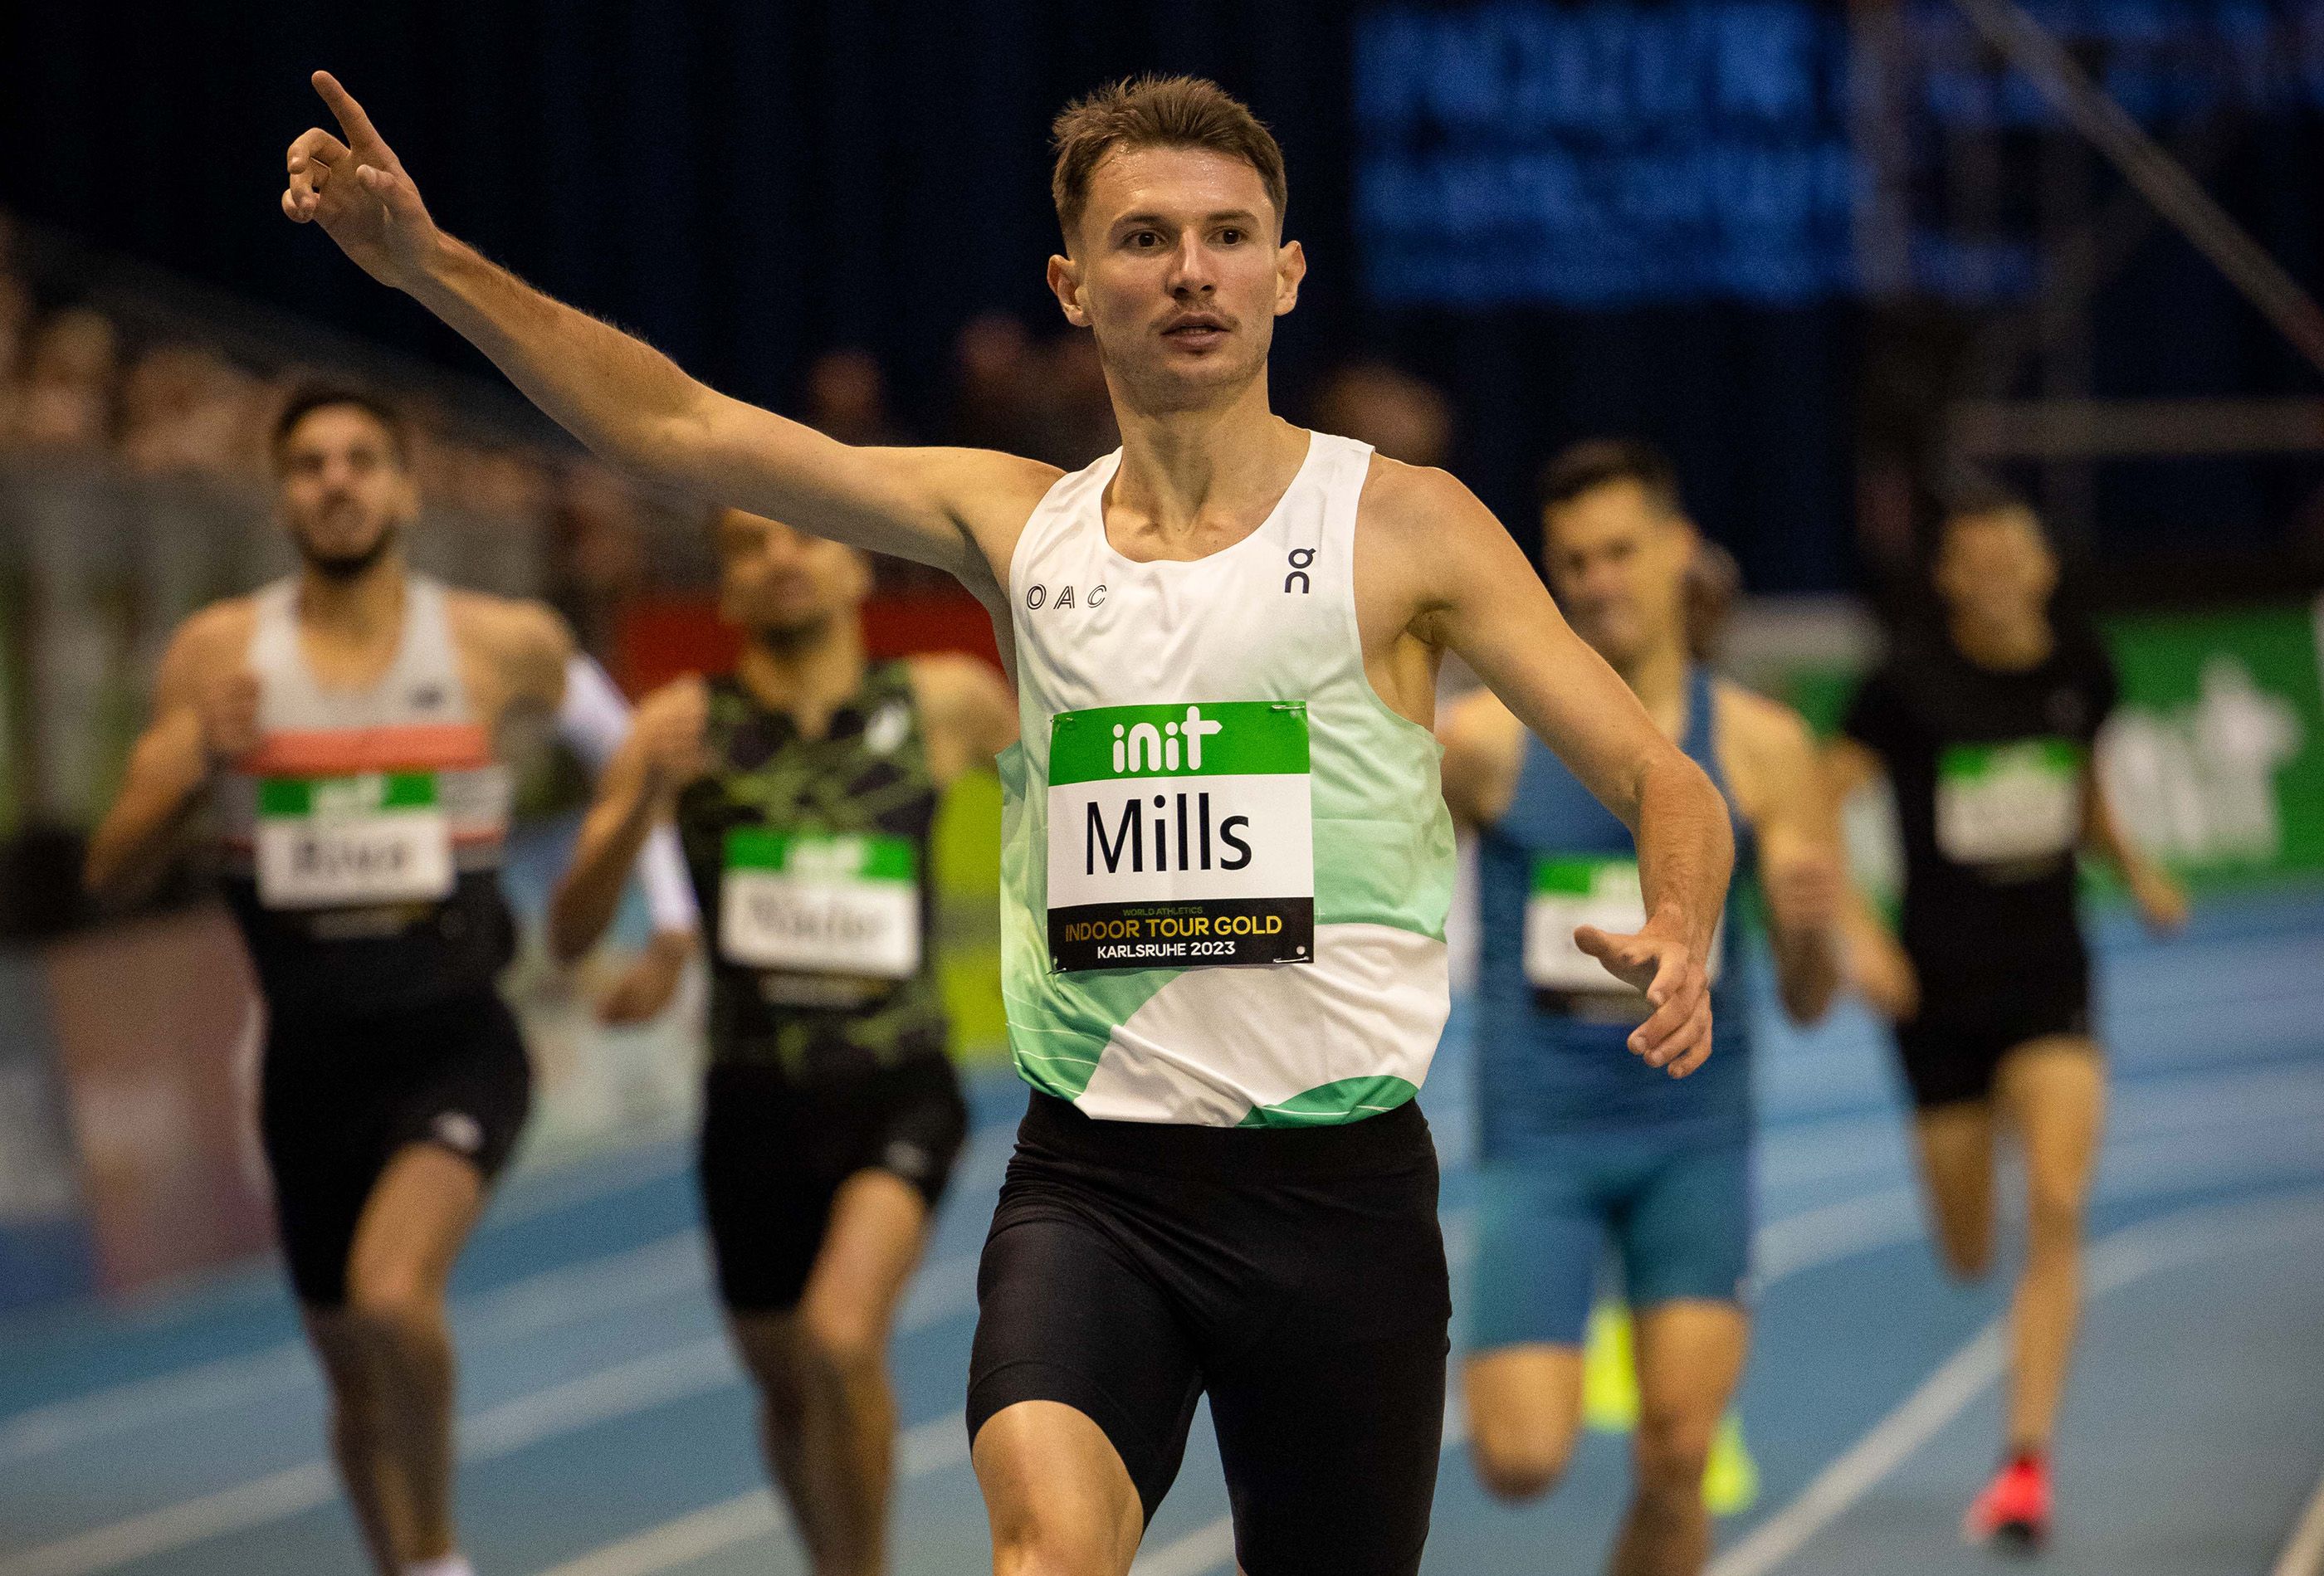 George Mills win the 1500m at the World Indoor Tour Gold meeting in Karlsruhe